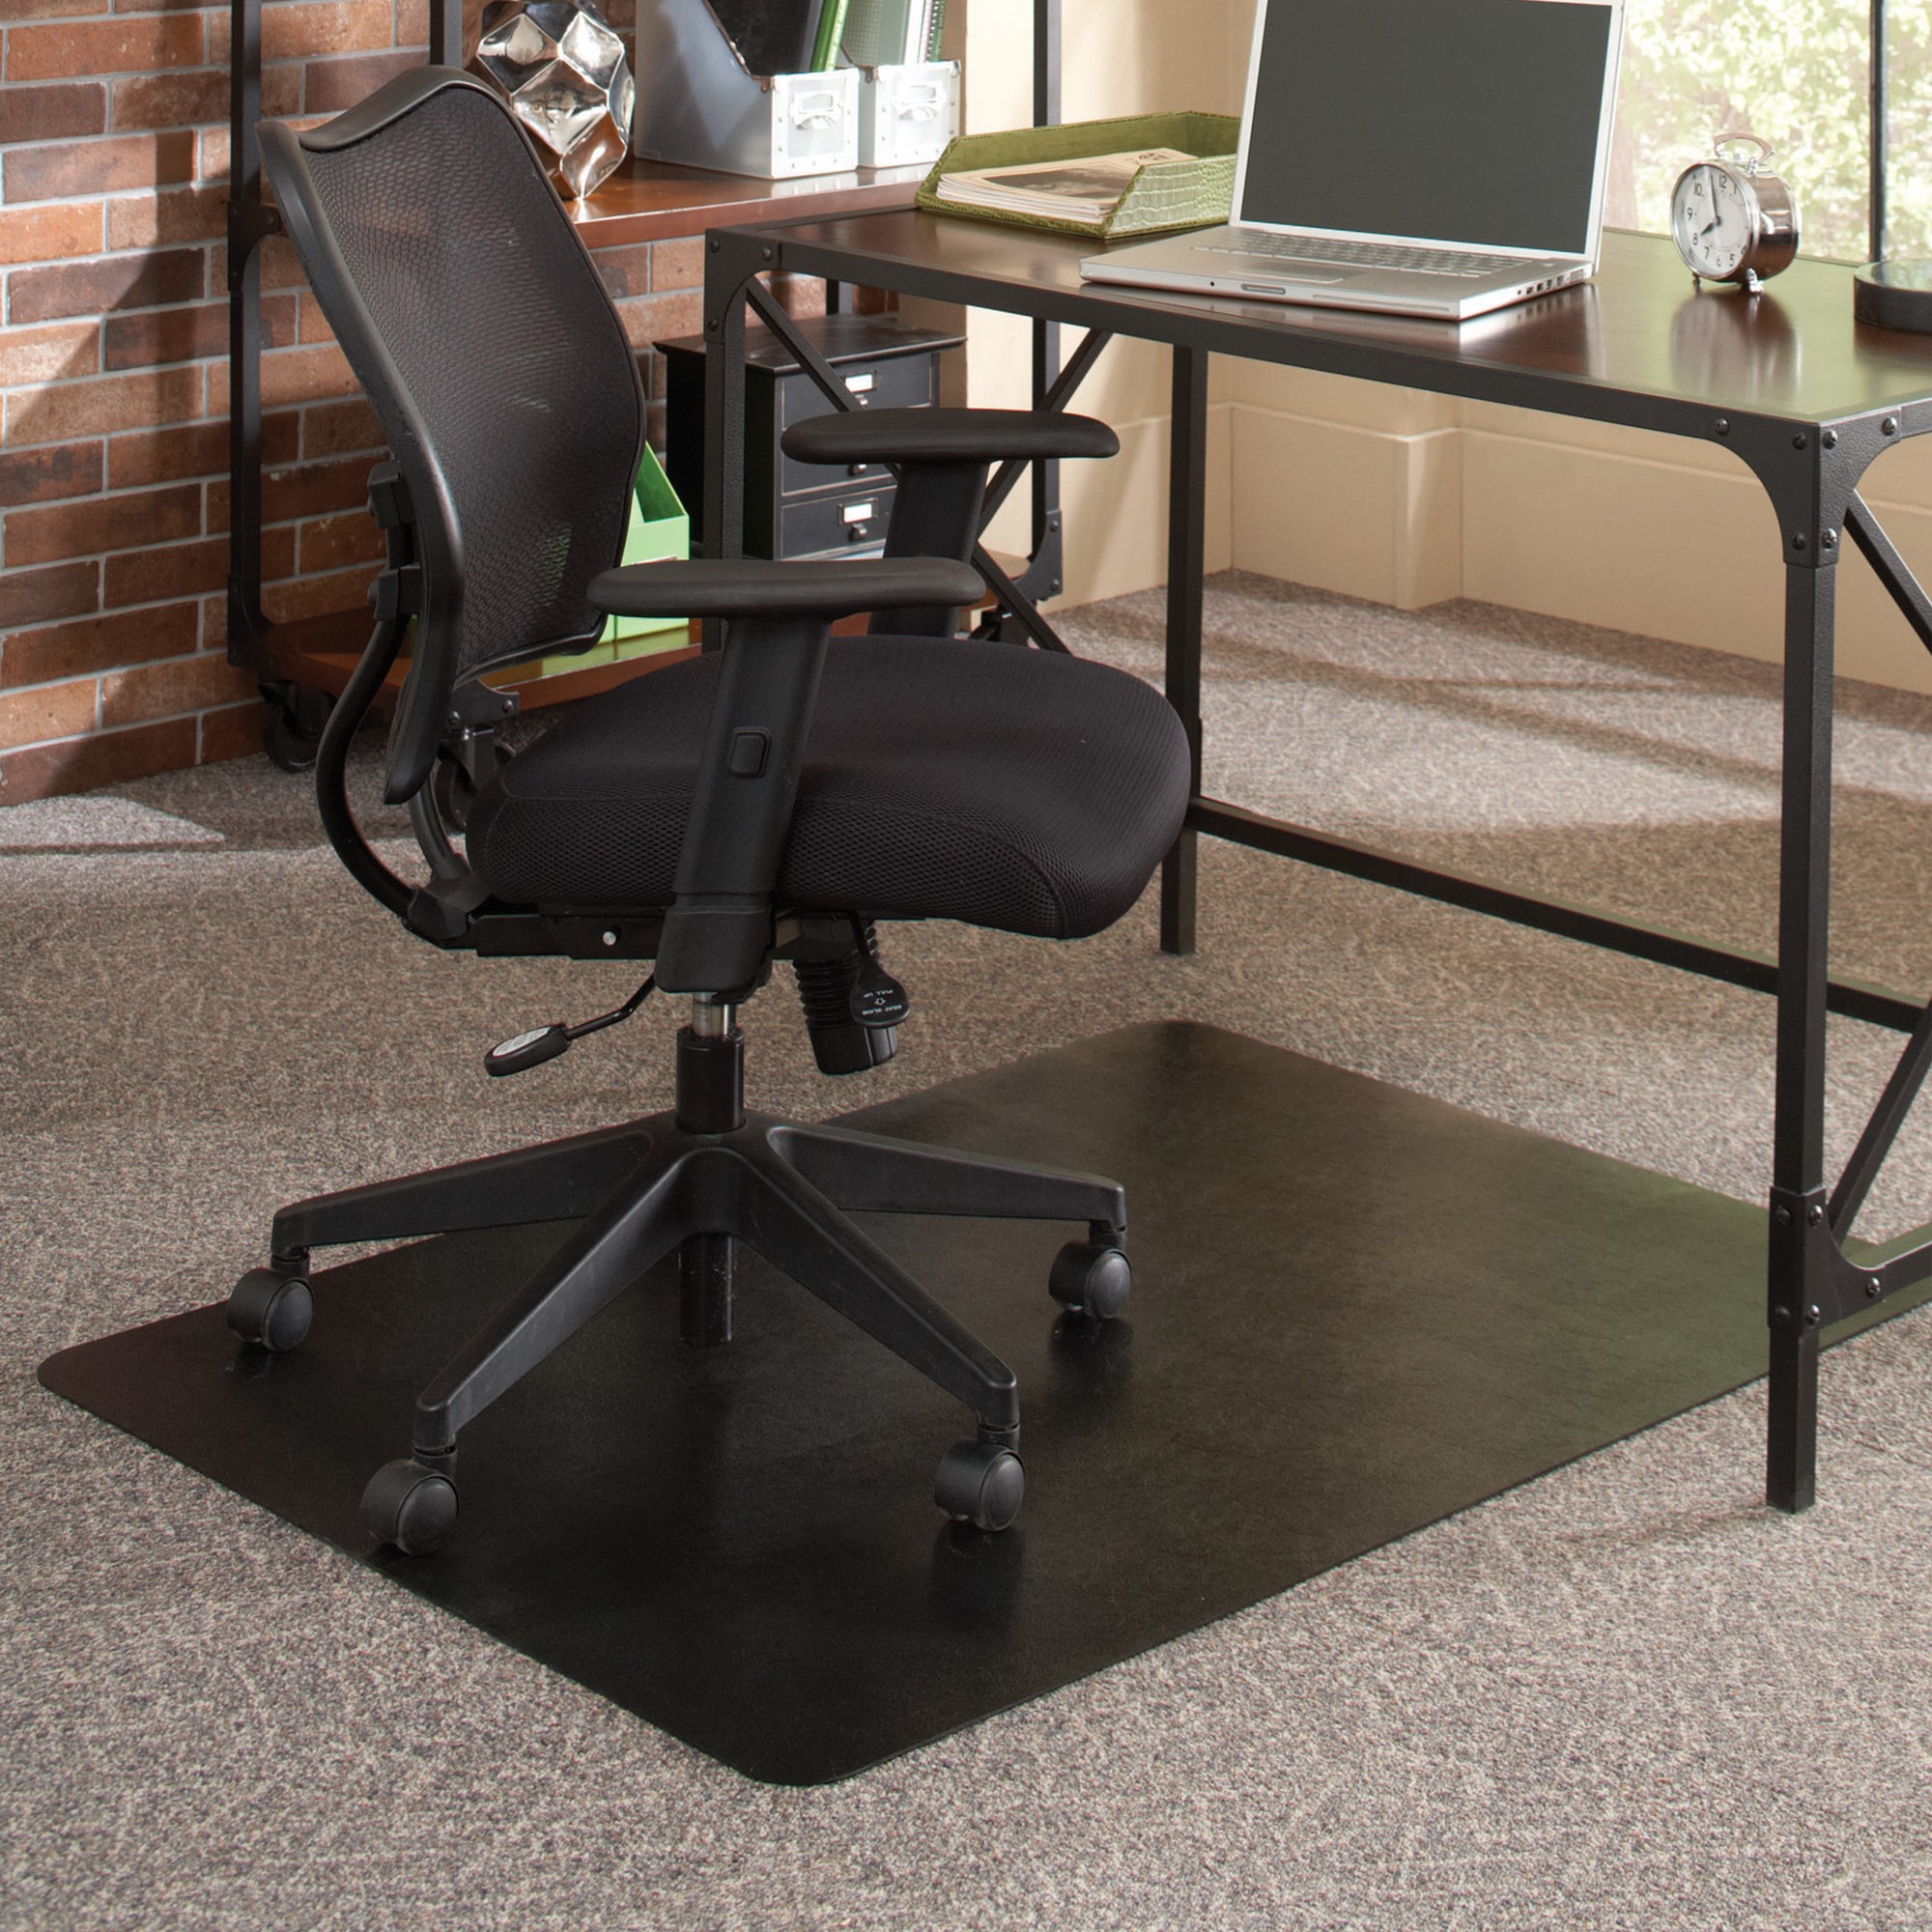 Aleco ES Robbins, Black Chair Mat for Low Pile Carpet, 36Inchx48Inch, Length 48 in, Width 36 in, Material Vinyl, Model 128013